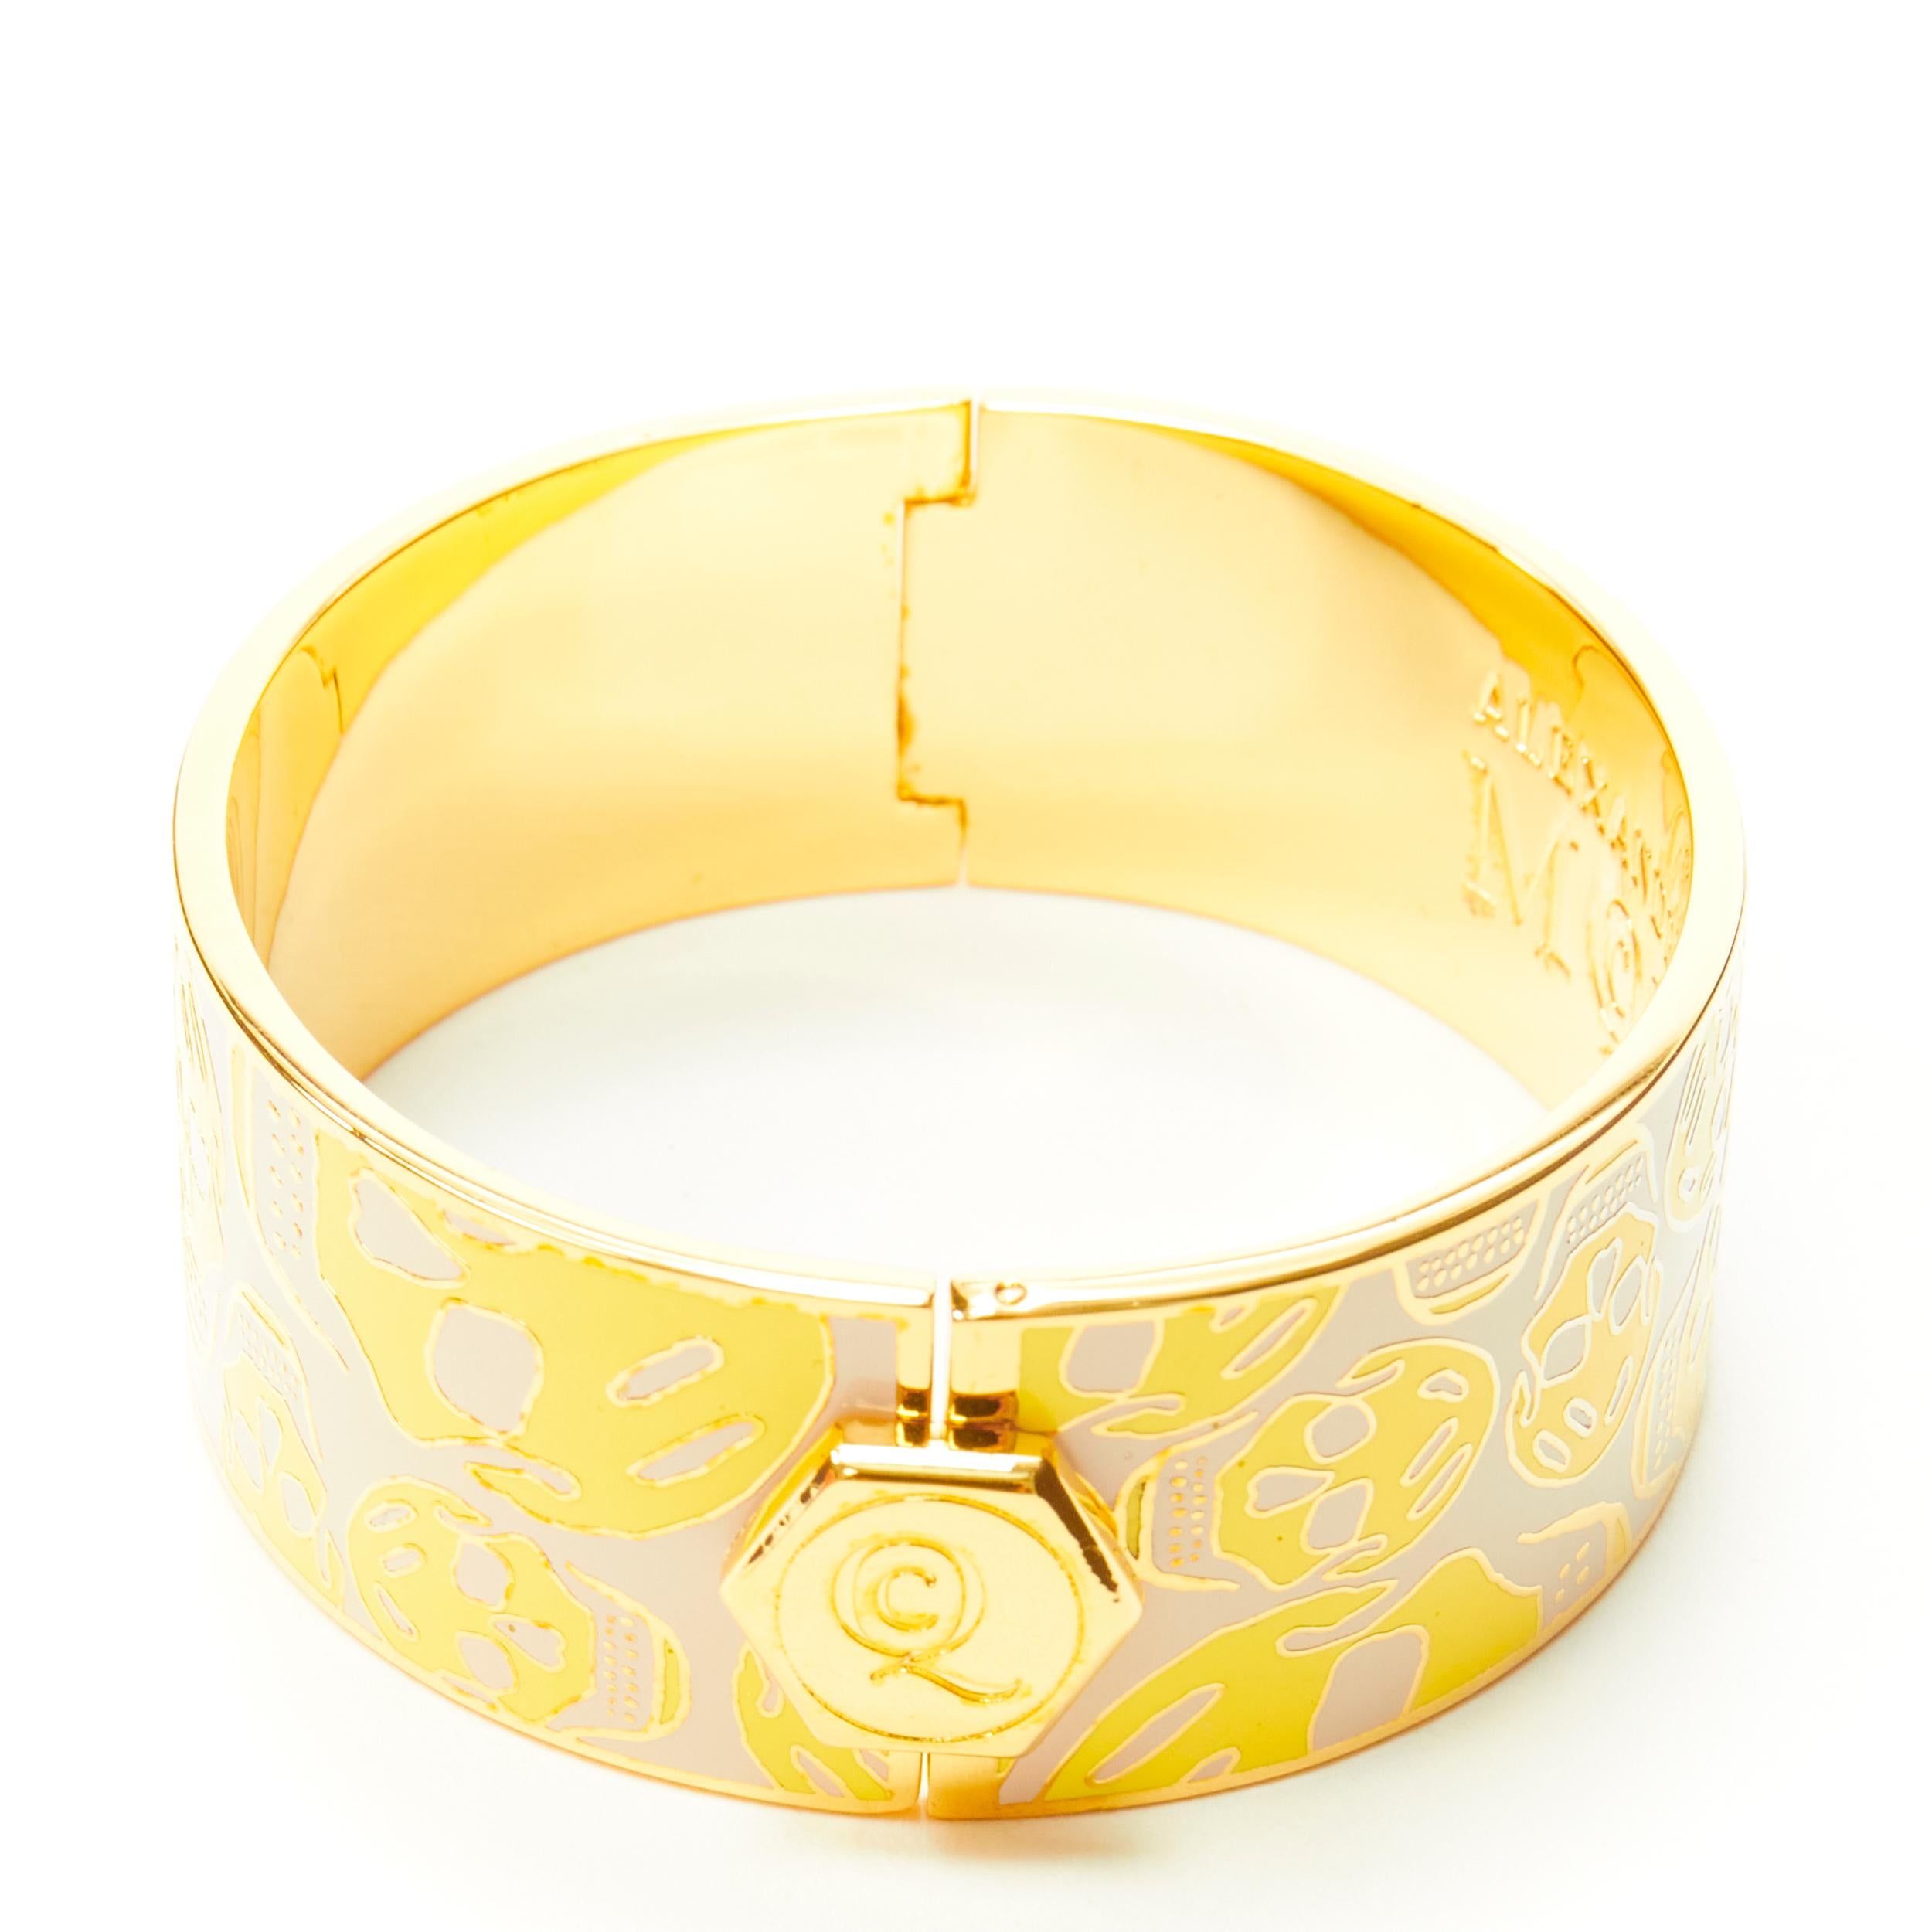 ALEXANDER MCQUEEN beige yellow skull enamel gold tone brass bangle cuff 
Reference: ANWU/A00146 
Brand: Alexander McQueen 
Material: Brass 
Color: Yellow 
Pattern: Skull 
Closure: Push clasp 
Extra Detail: MCQ logo button hinged bangle. 
Made in: